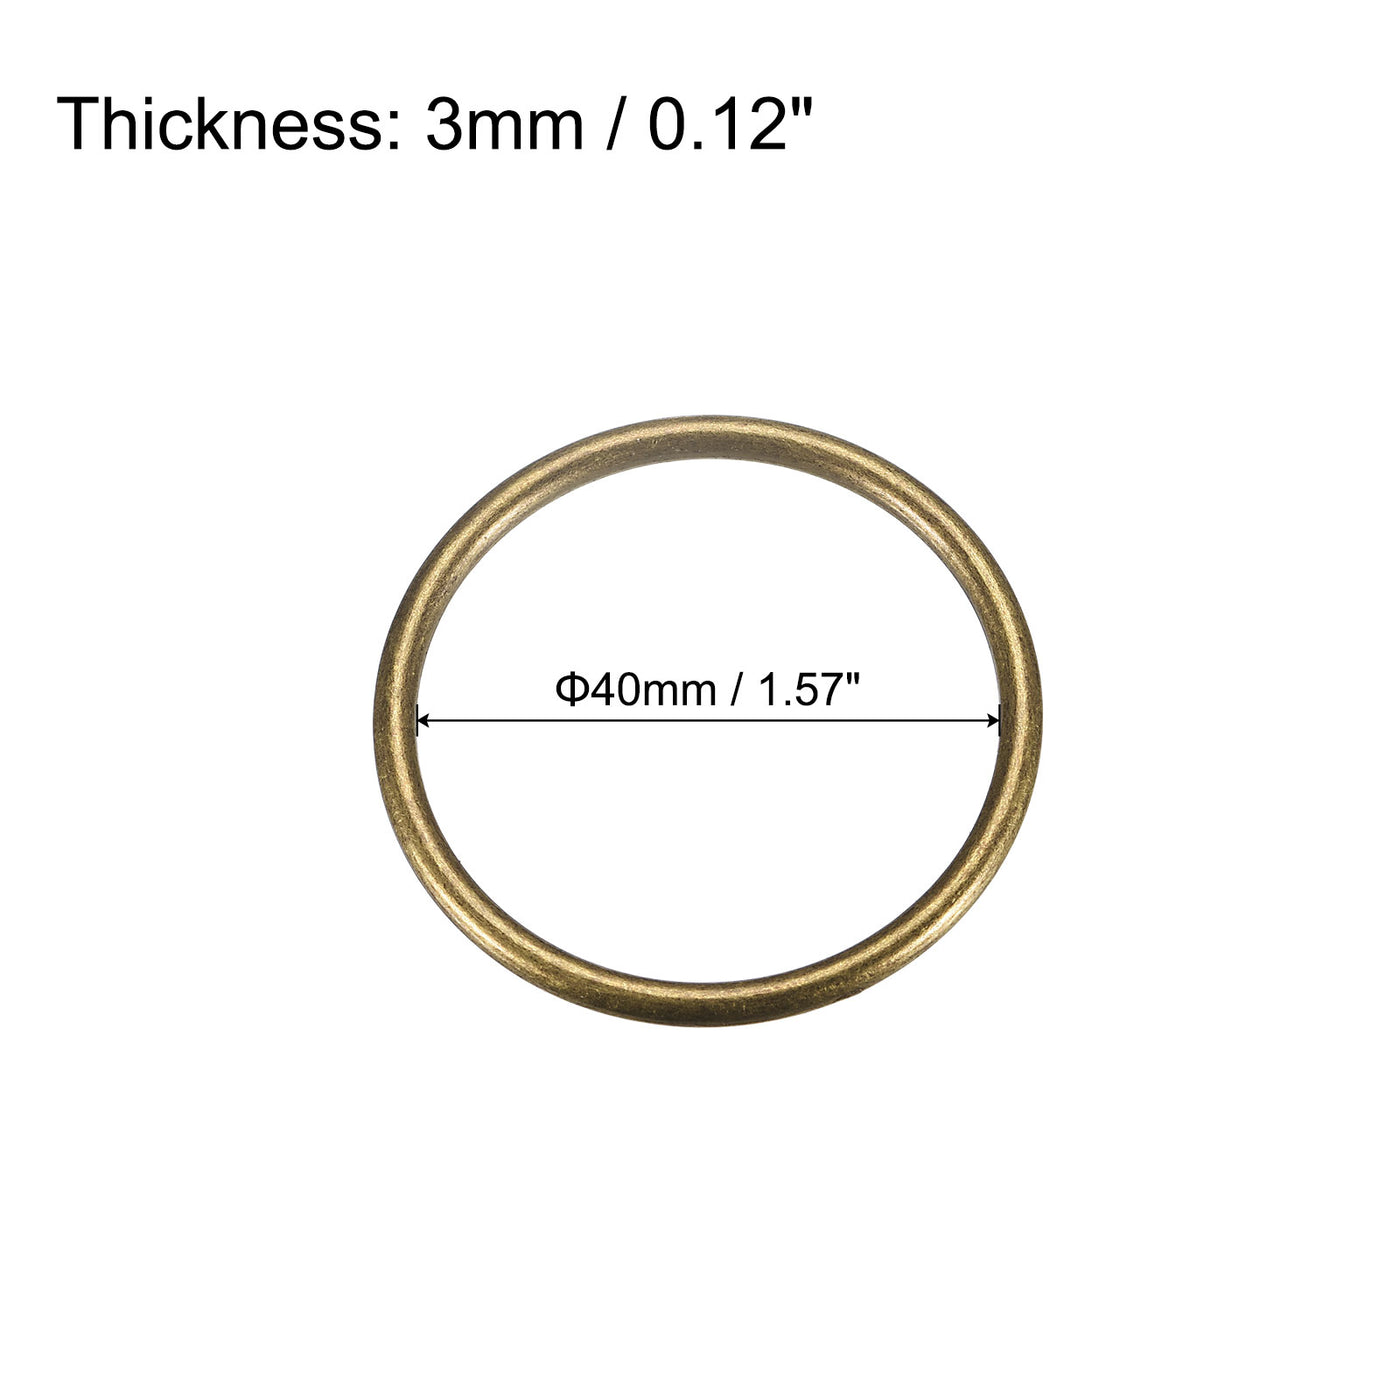 uxcell Uxcell Metal O Rings, 8pcs 40mm(1.57") ID 3mm Thick Welded O-Ringe, Bronze Tone